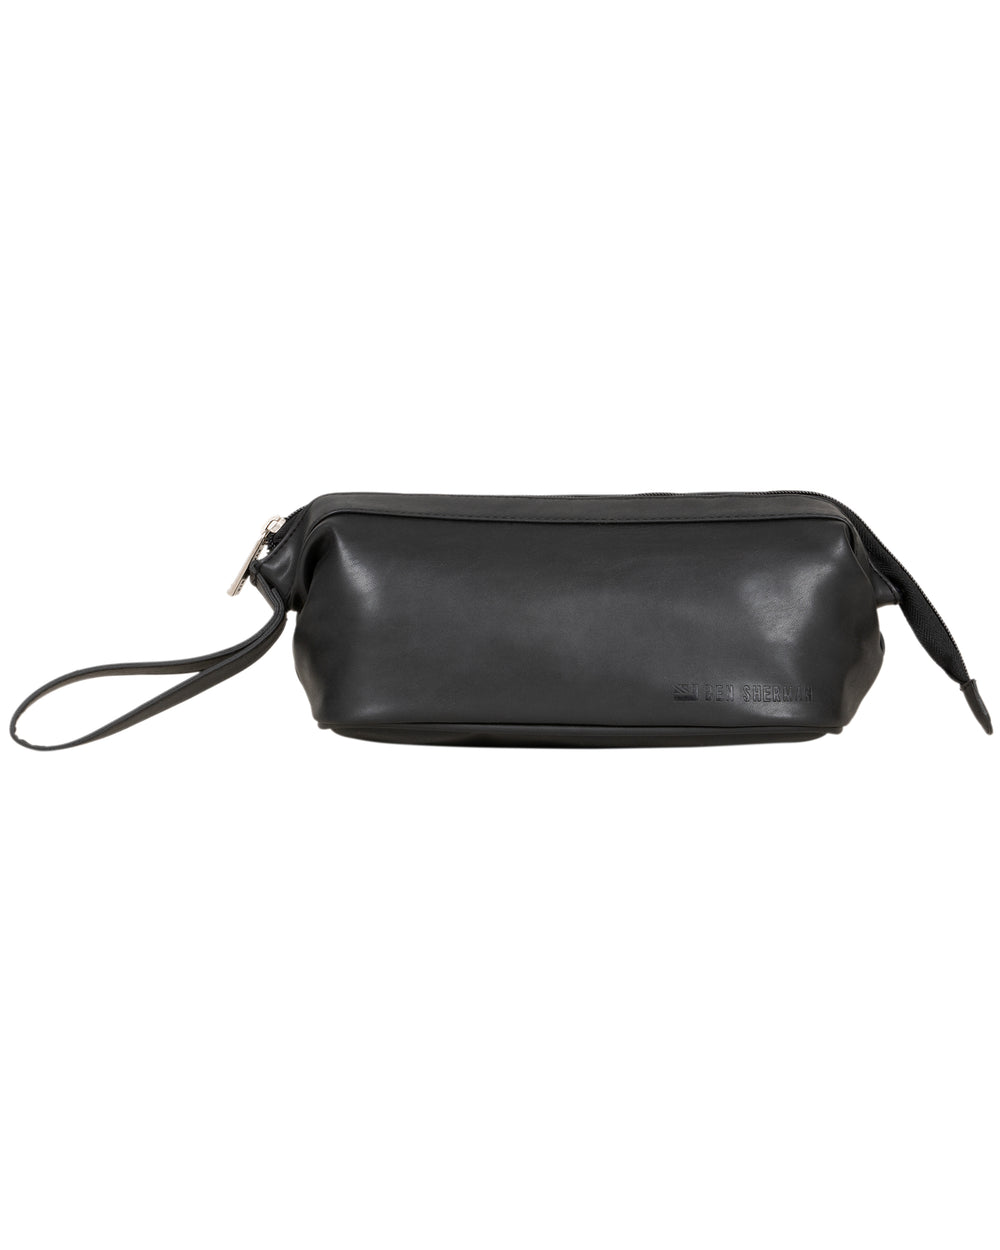 Top Zip Travel Dopp Kit With Wide Mouth Opening - Black